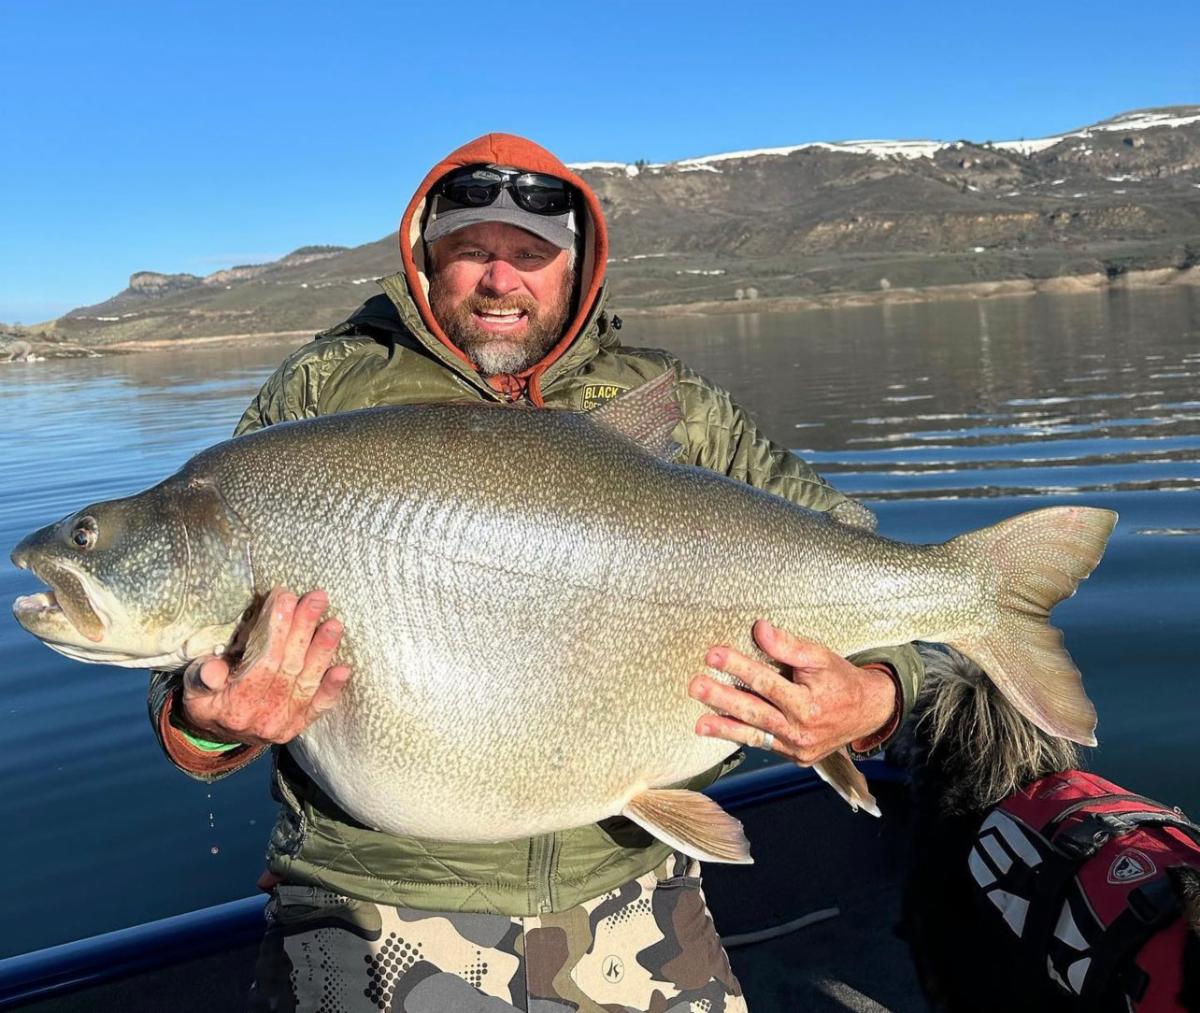 The Hardest Fishing World Records to Beat